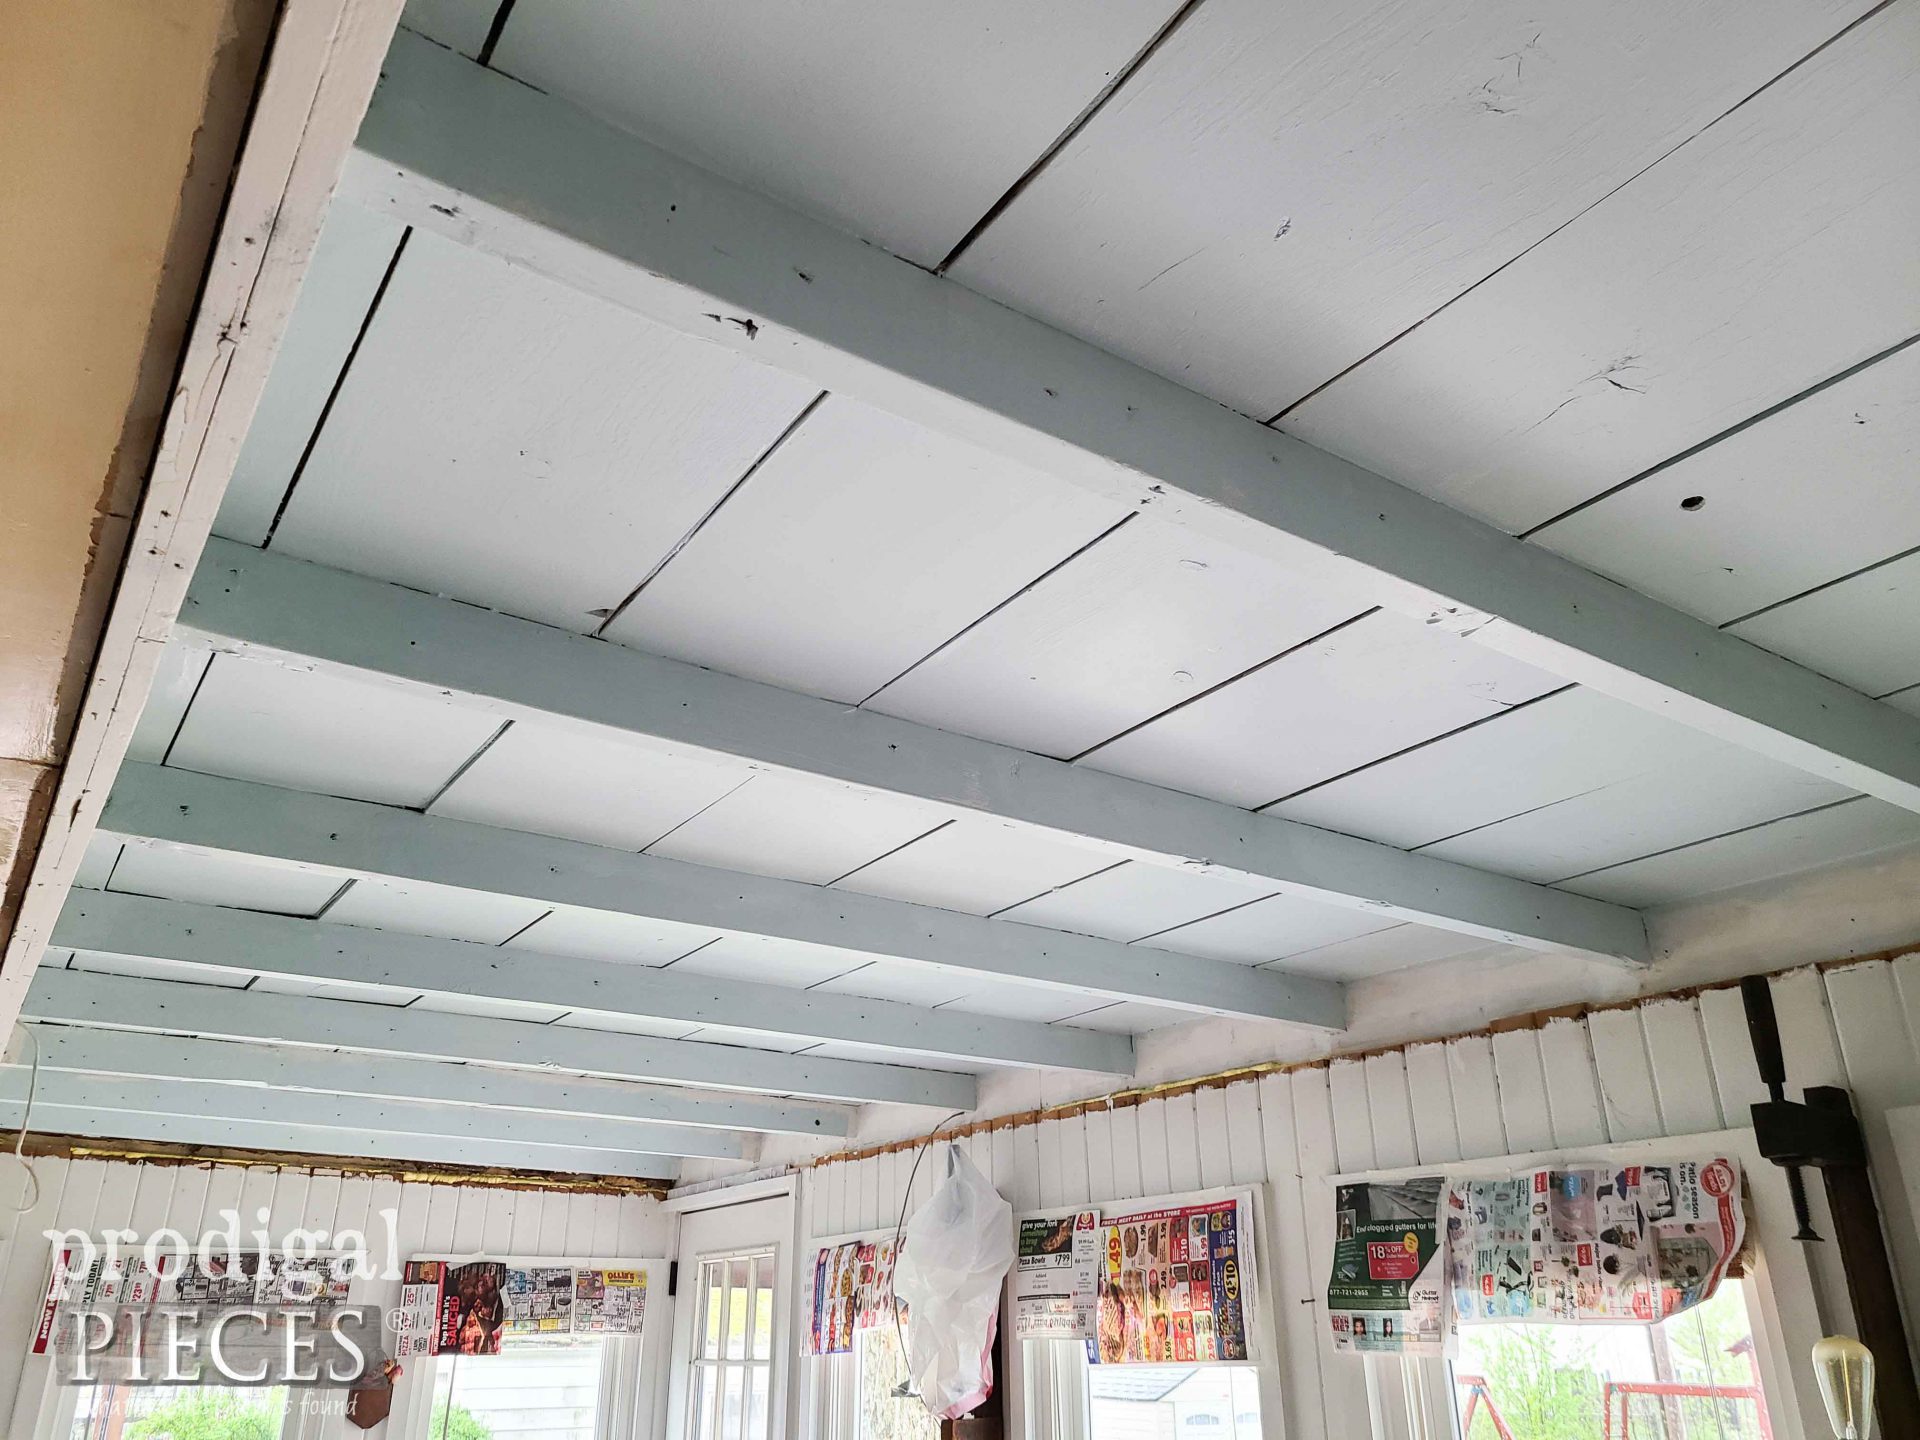 First Coat of Blue Dining Room Ceiling | prodigalpieces.com #prodigalpieces